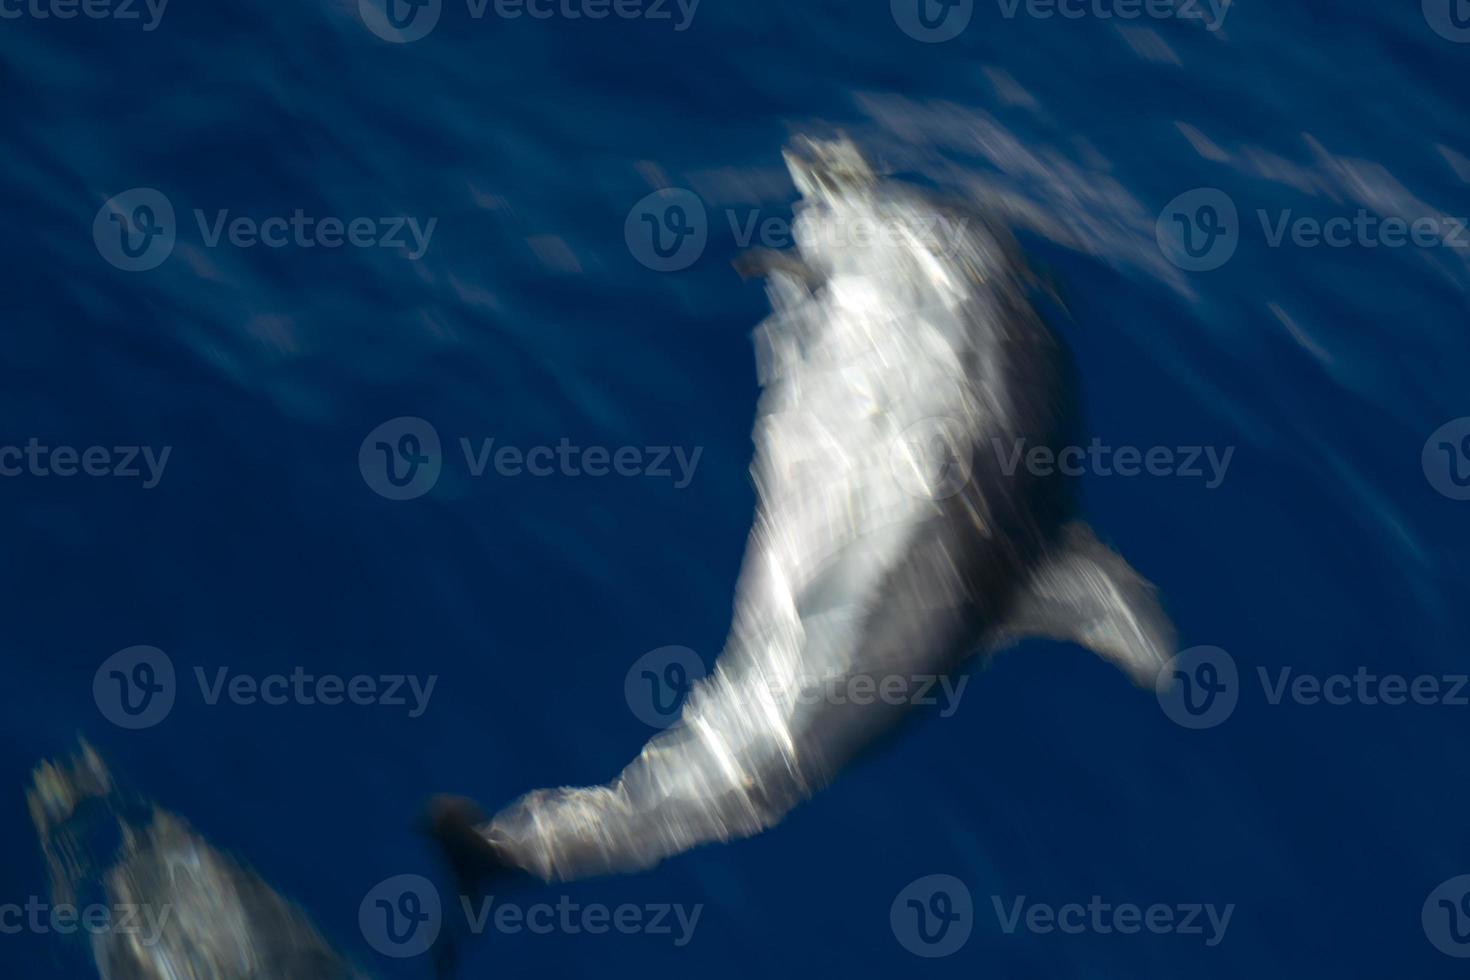 Move effect on Dolphin while jumping in the deep blue sea photo